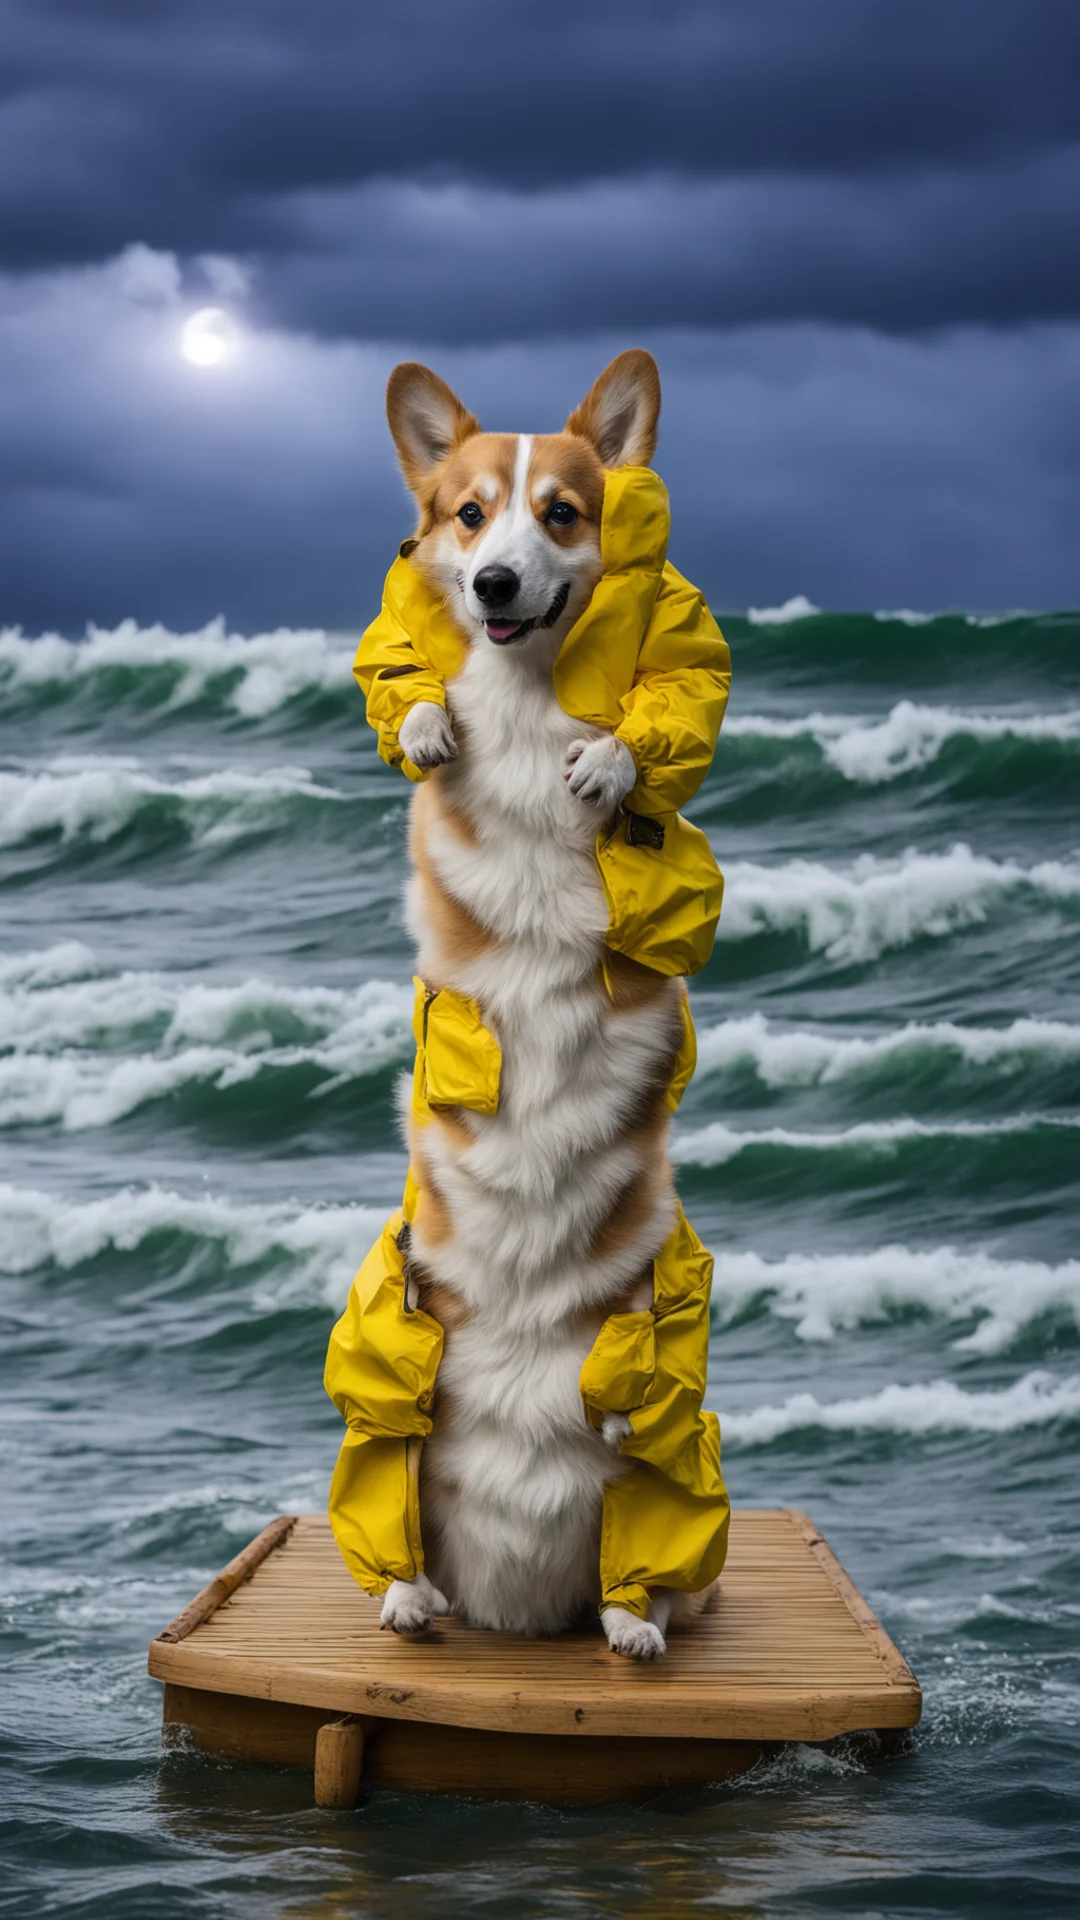 aia corgi in a yellow jacket on a bamboo raft in the middle of a tormented ocean during night thunder amazing awesome portrait 2 tall